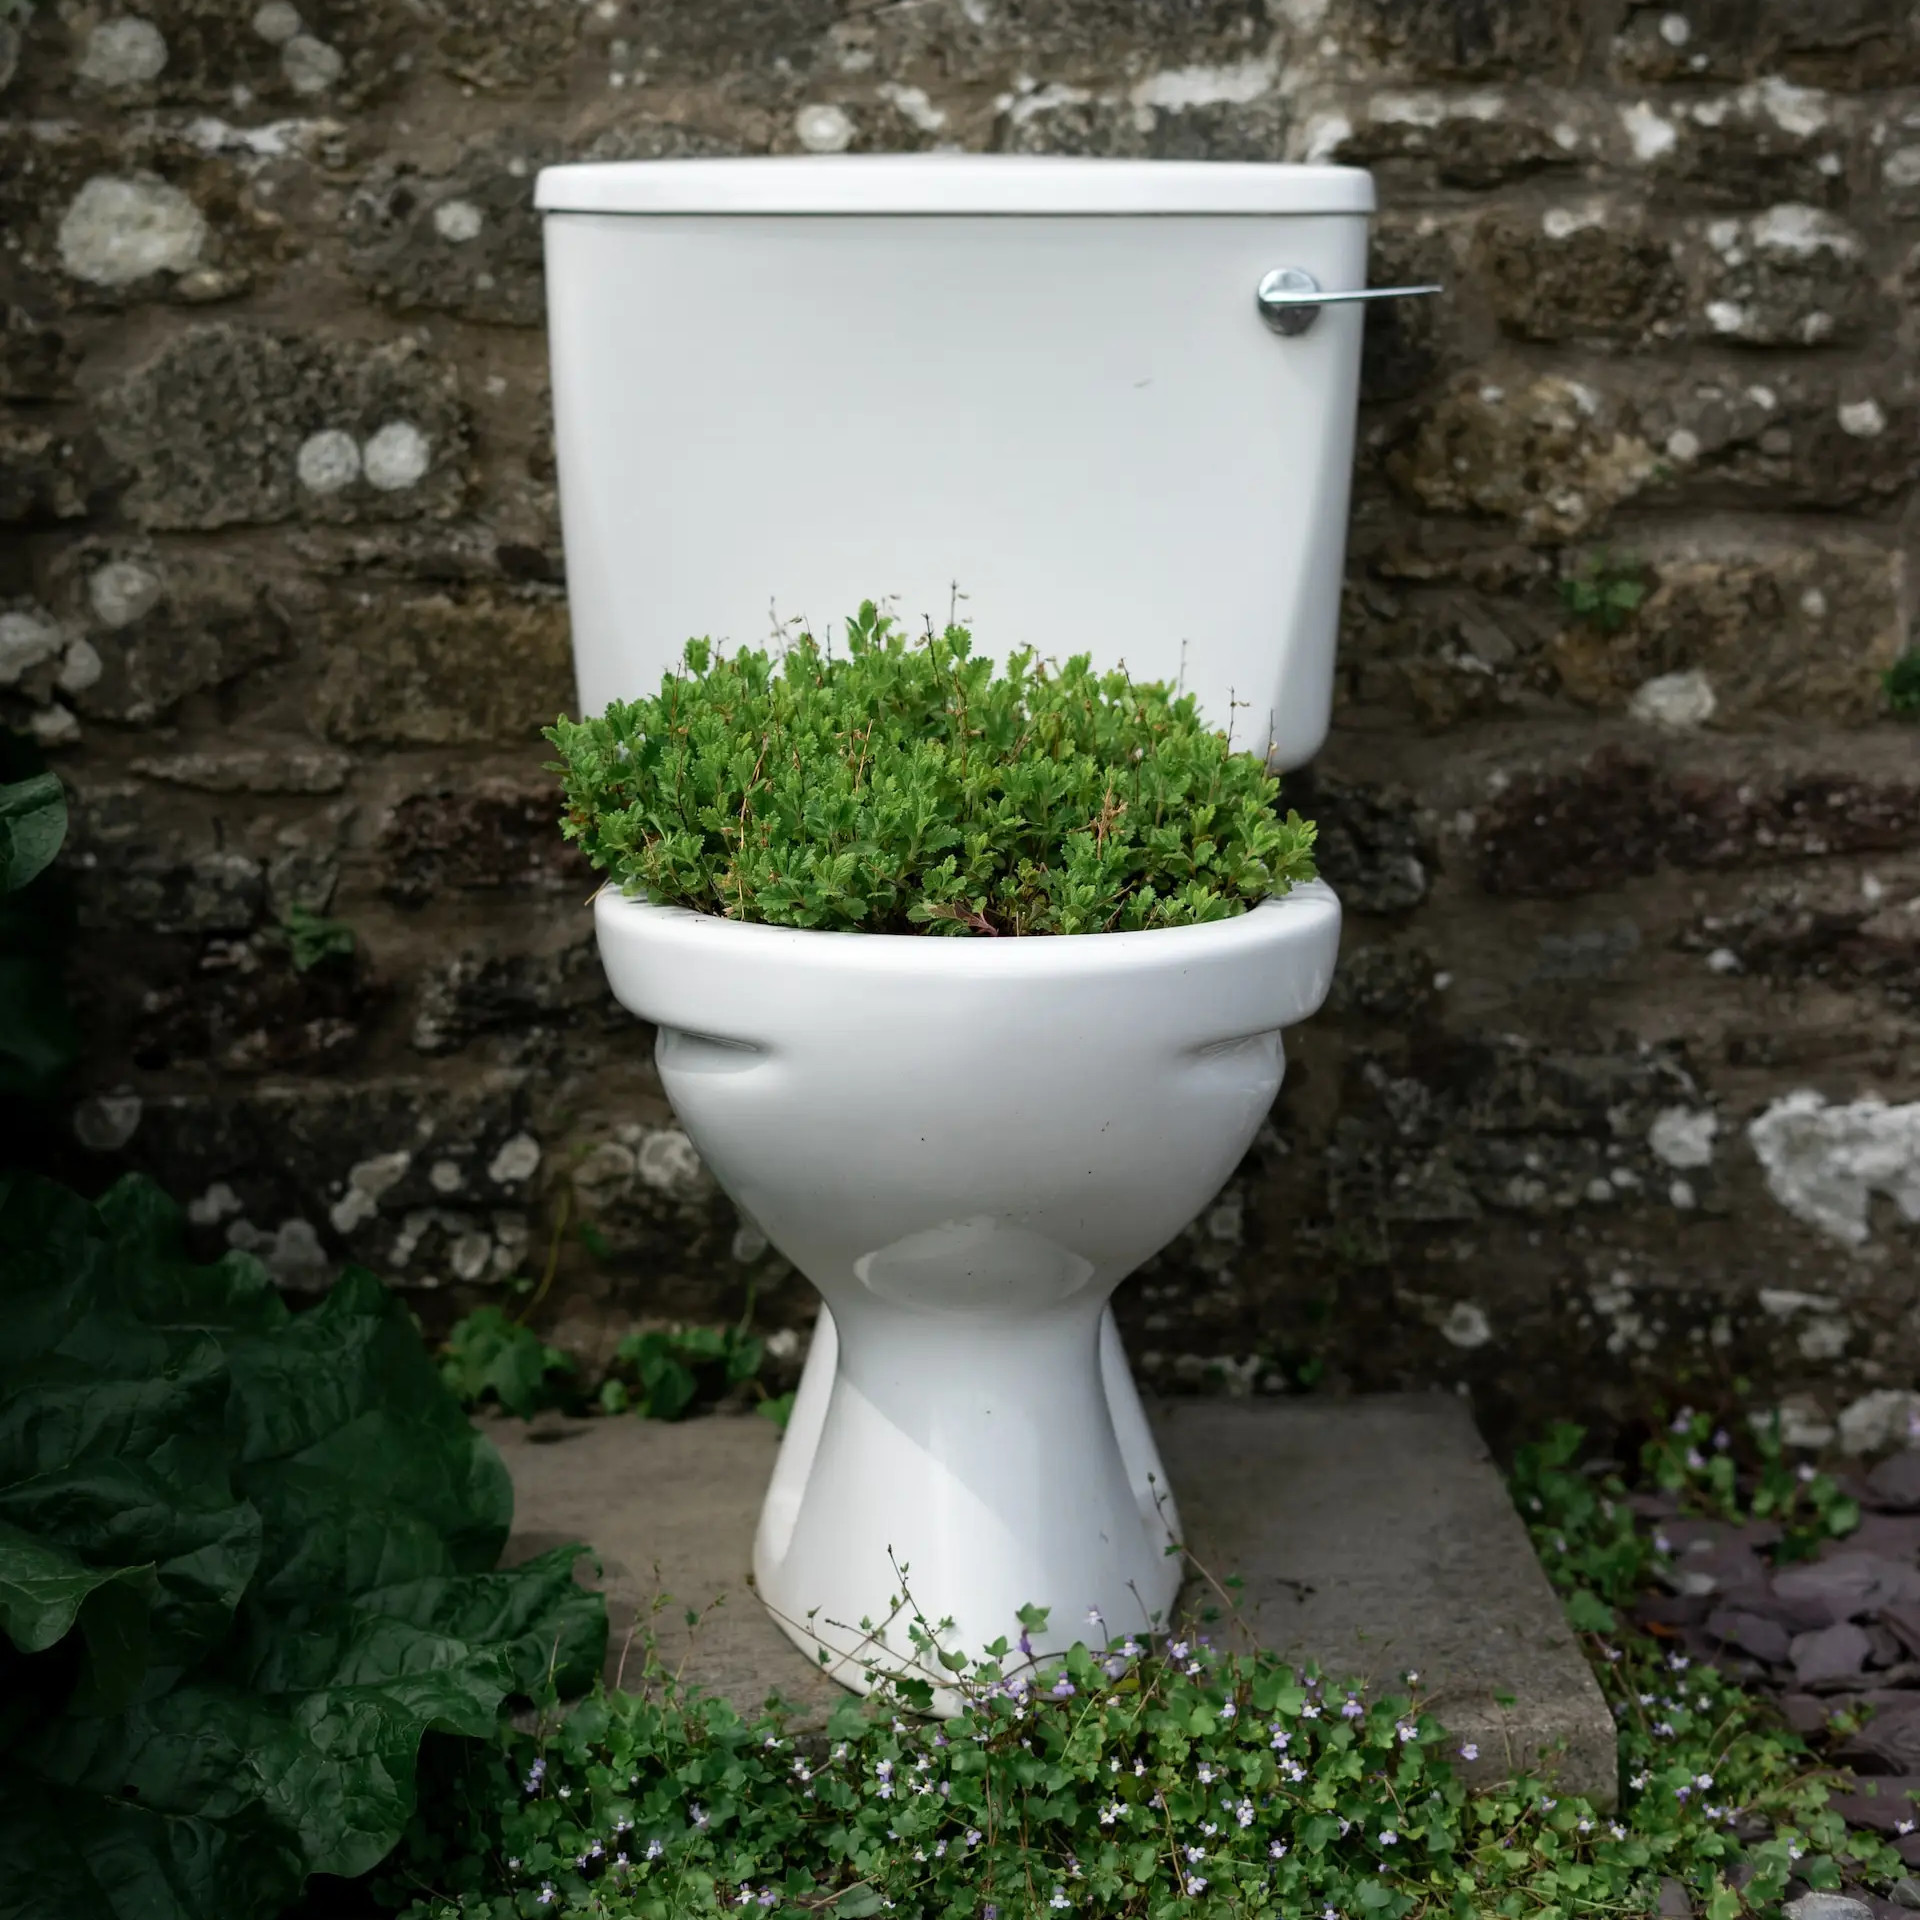 A toilet with a plant growing out of it, photo by Will Wright courtesy of Unsplash